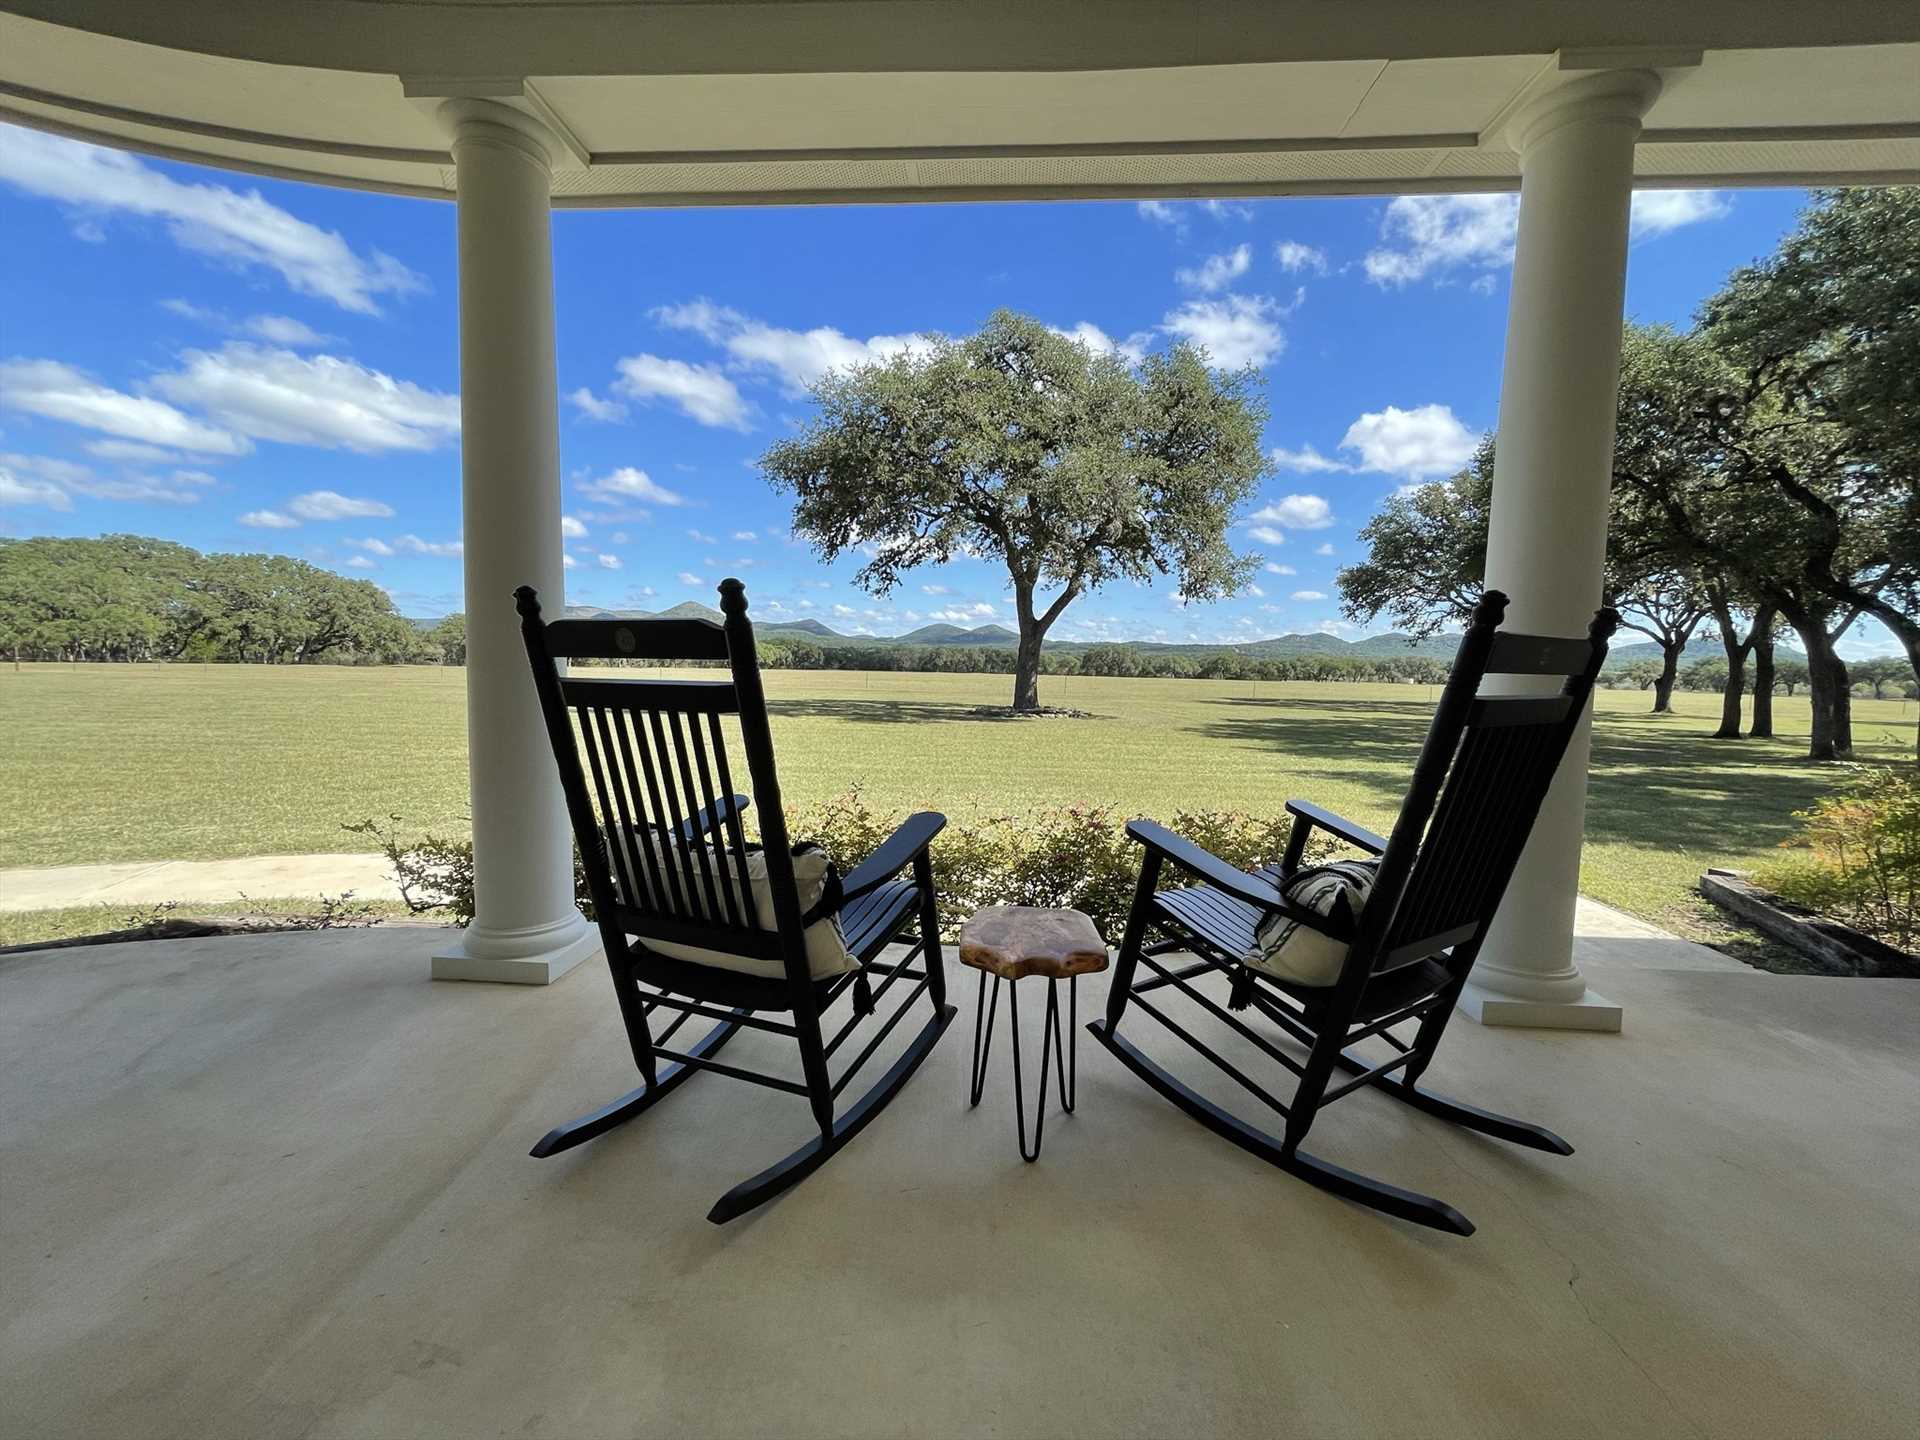                                                 Imagine rocking and relaxing to that amazing Hill Country view!